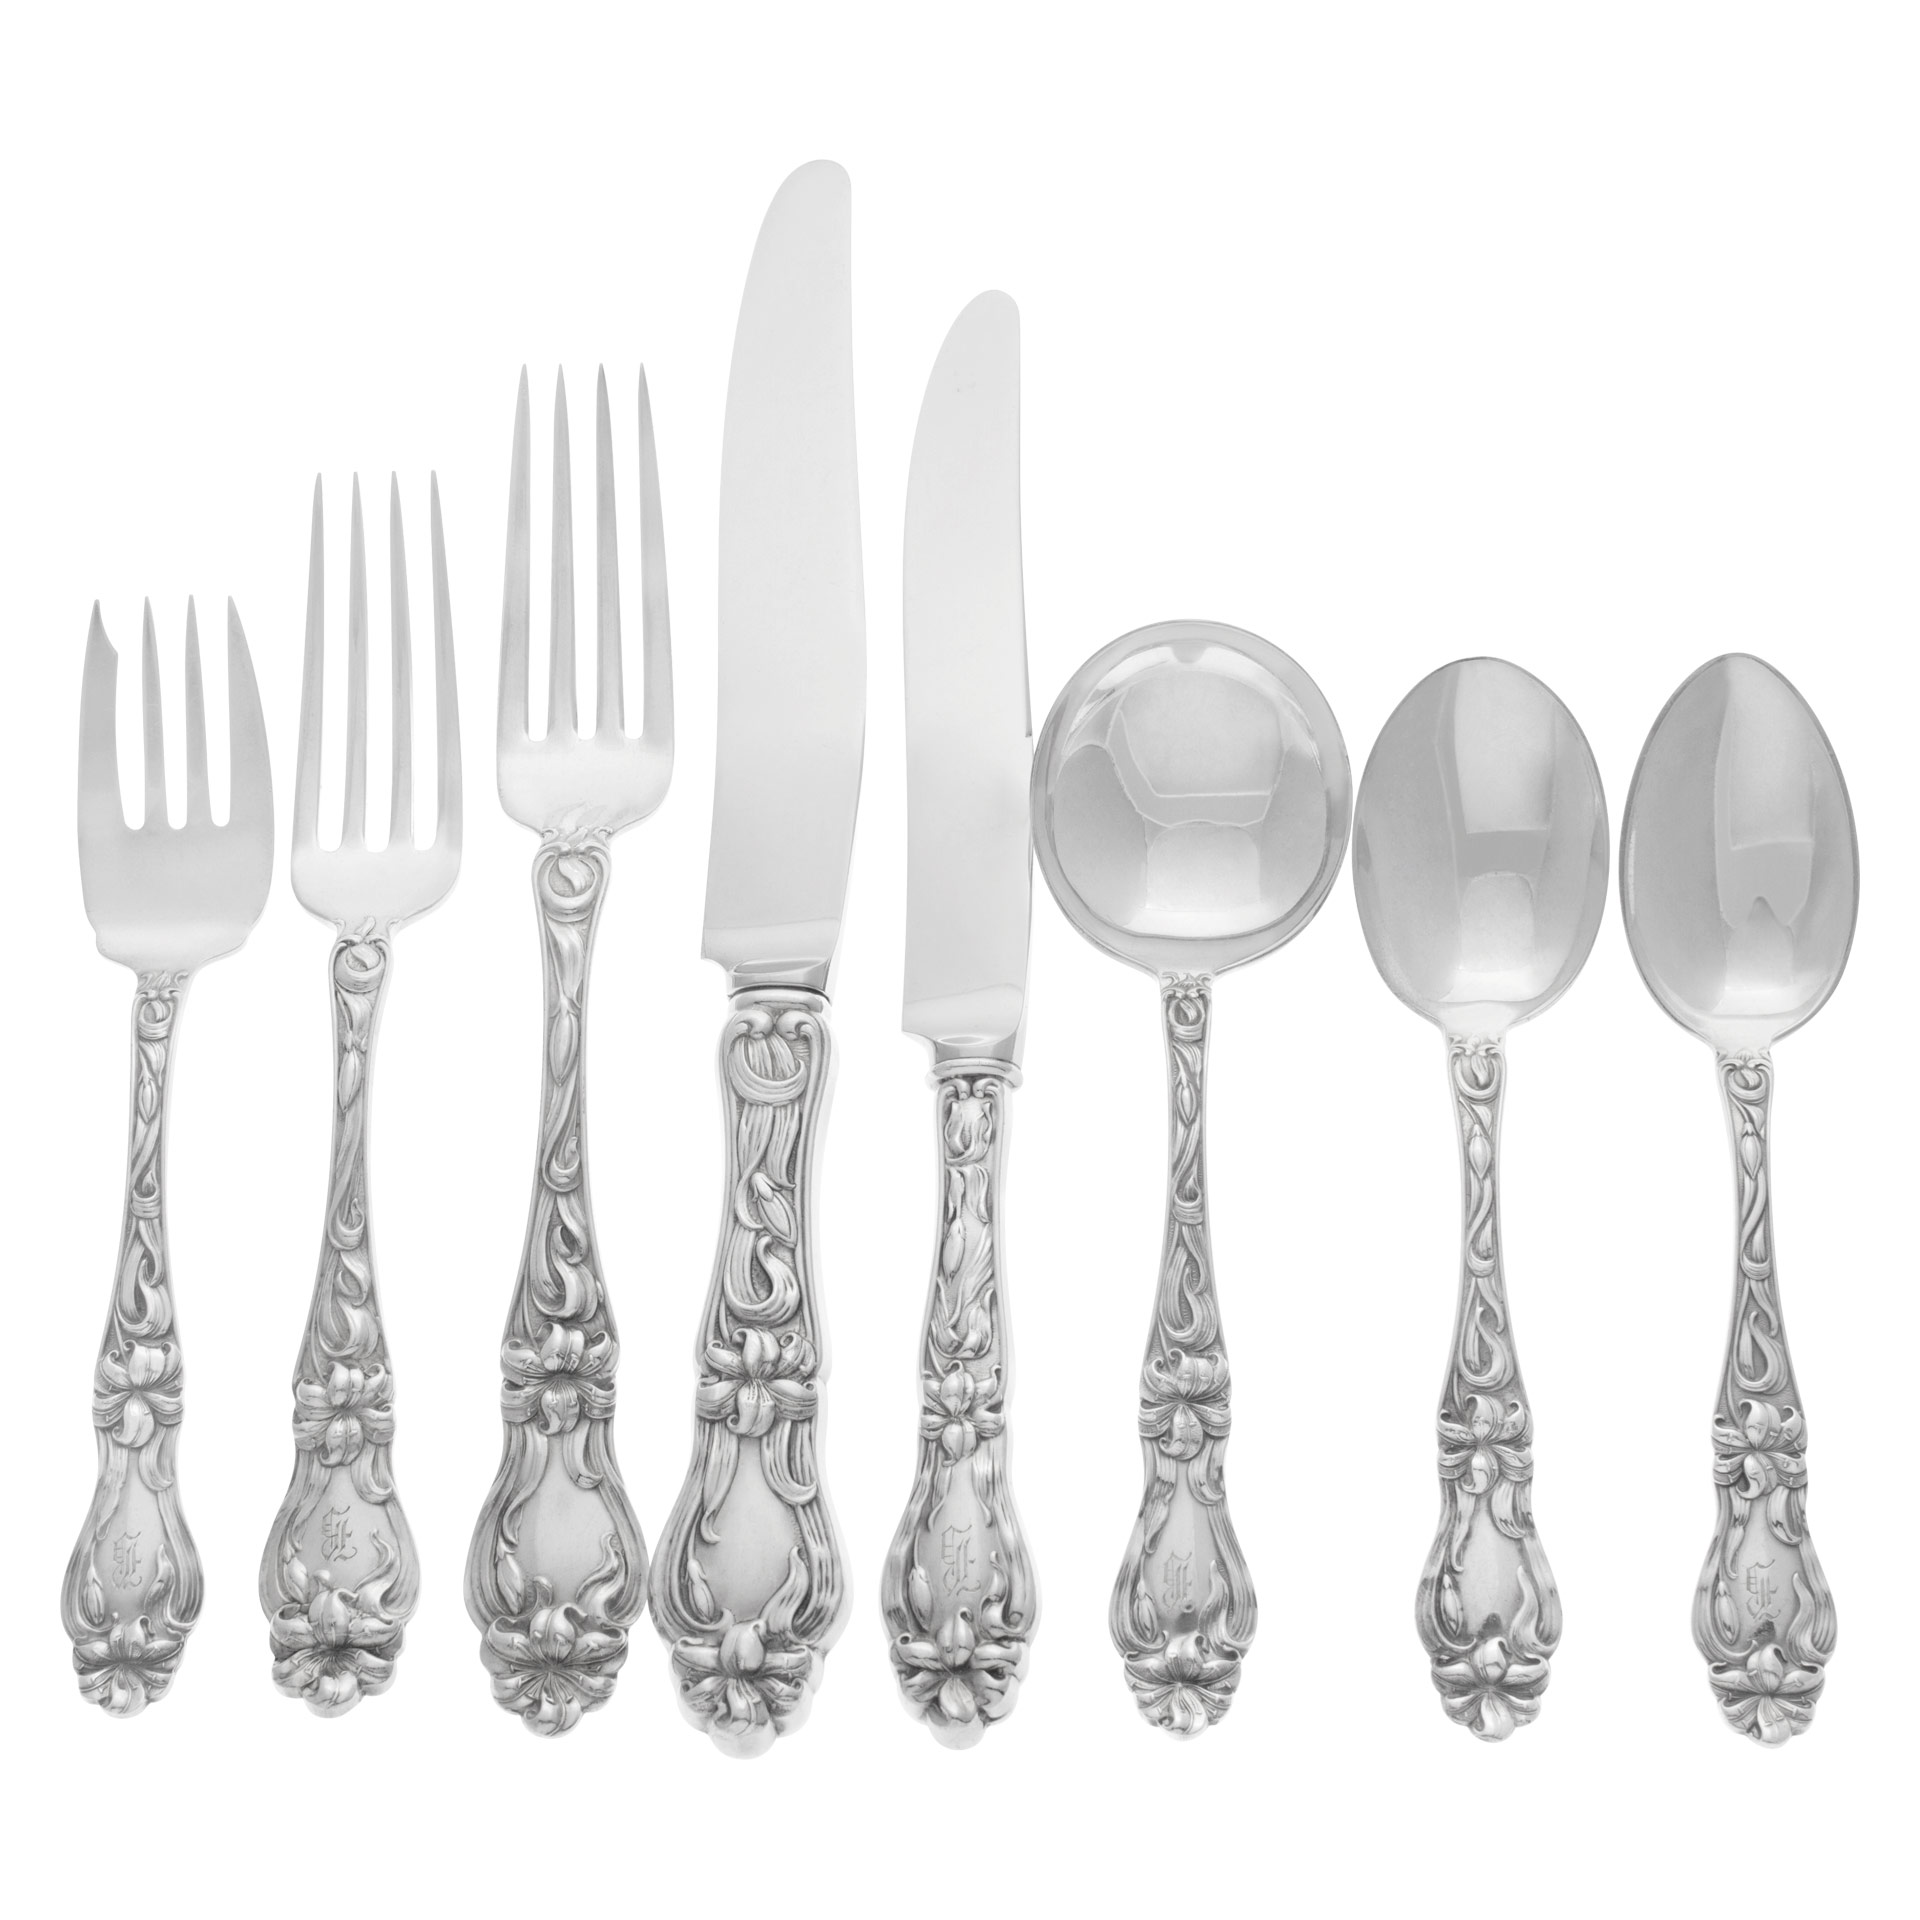 "LILY" Sterling flatware set ptd in 1910 by Frank M Whiting.  Almost complete 8 Place setting for 12 (Dinner & Lunch) + 5 Serving Pieces - 108 pieces total-